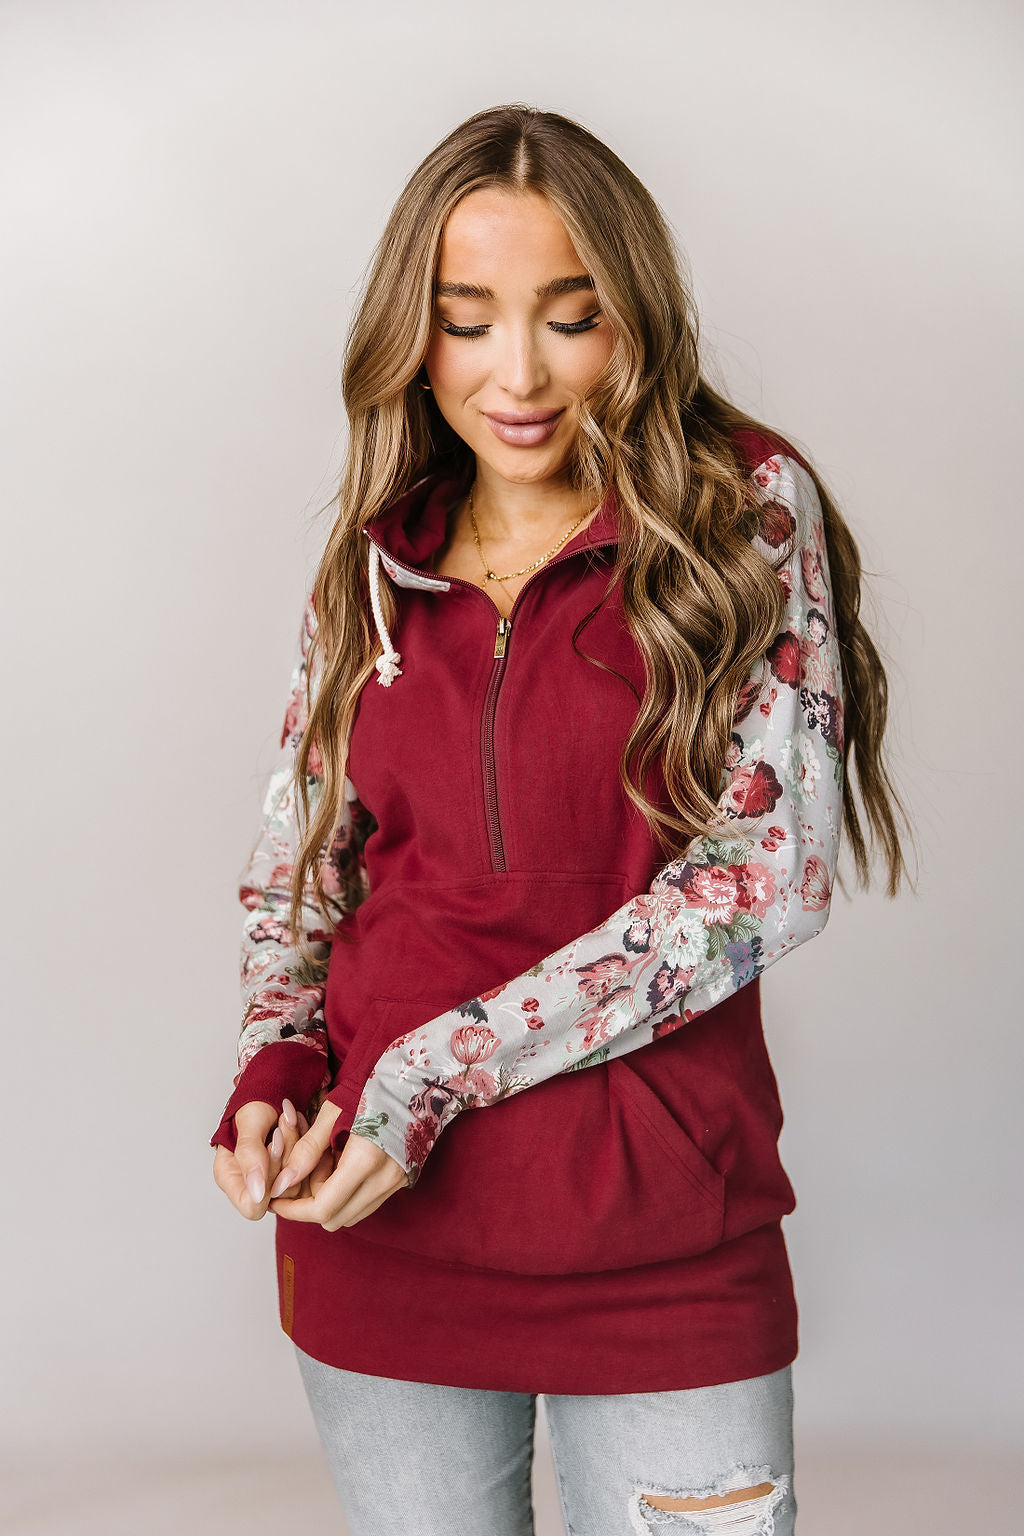 NEW ~ Ampersand Halfzip Sweatshirt - Among the Wildflowers ~ Deep Red~ Available in Curvy!